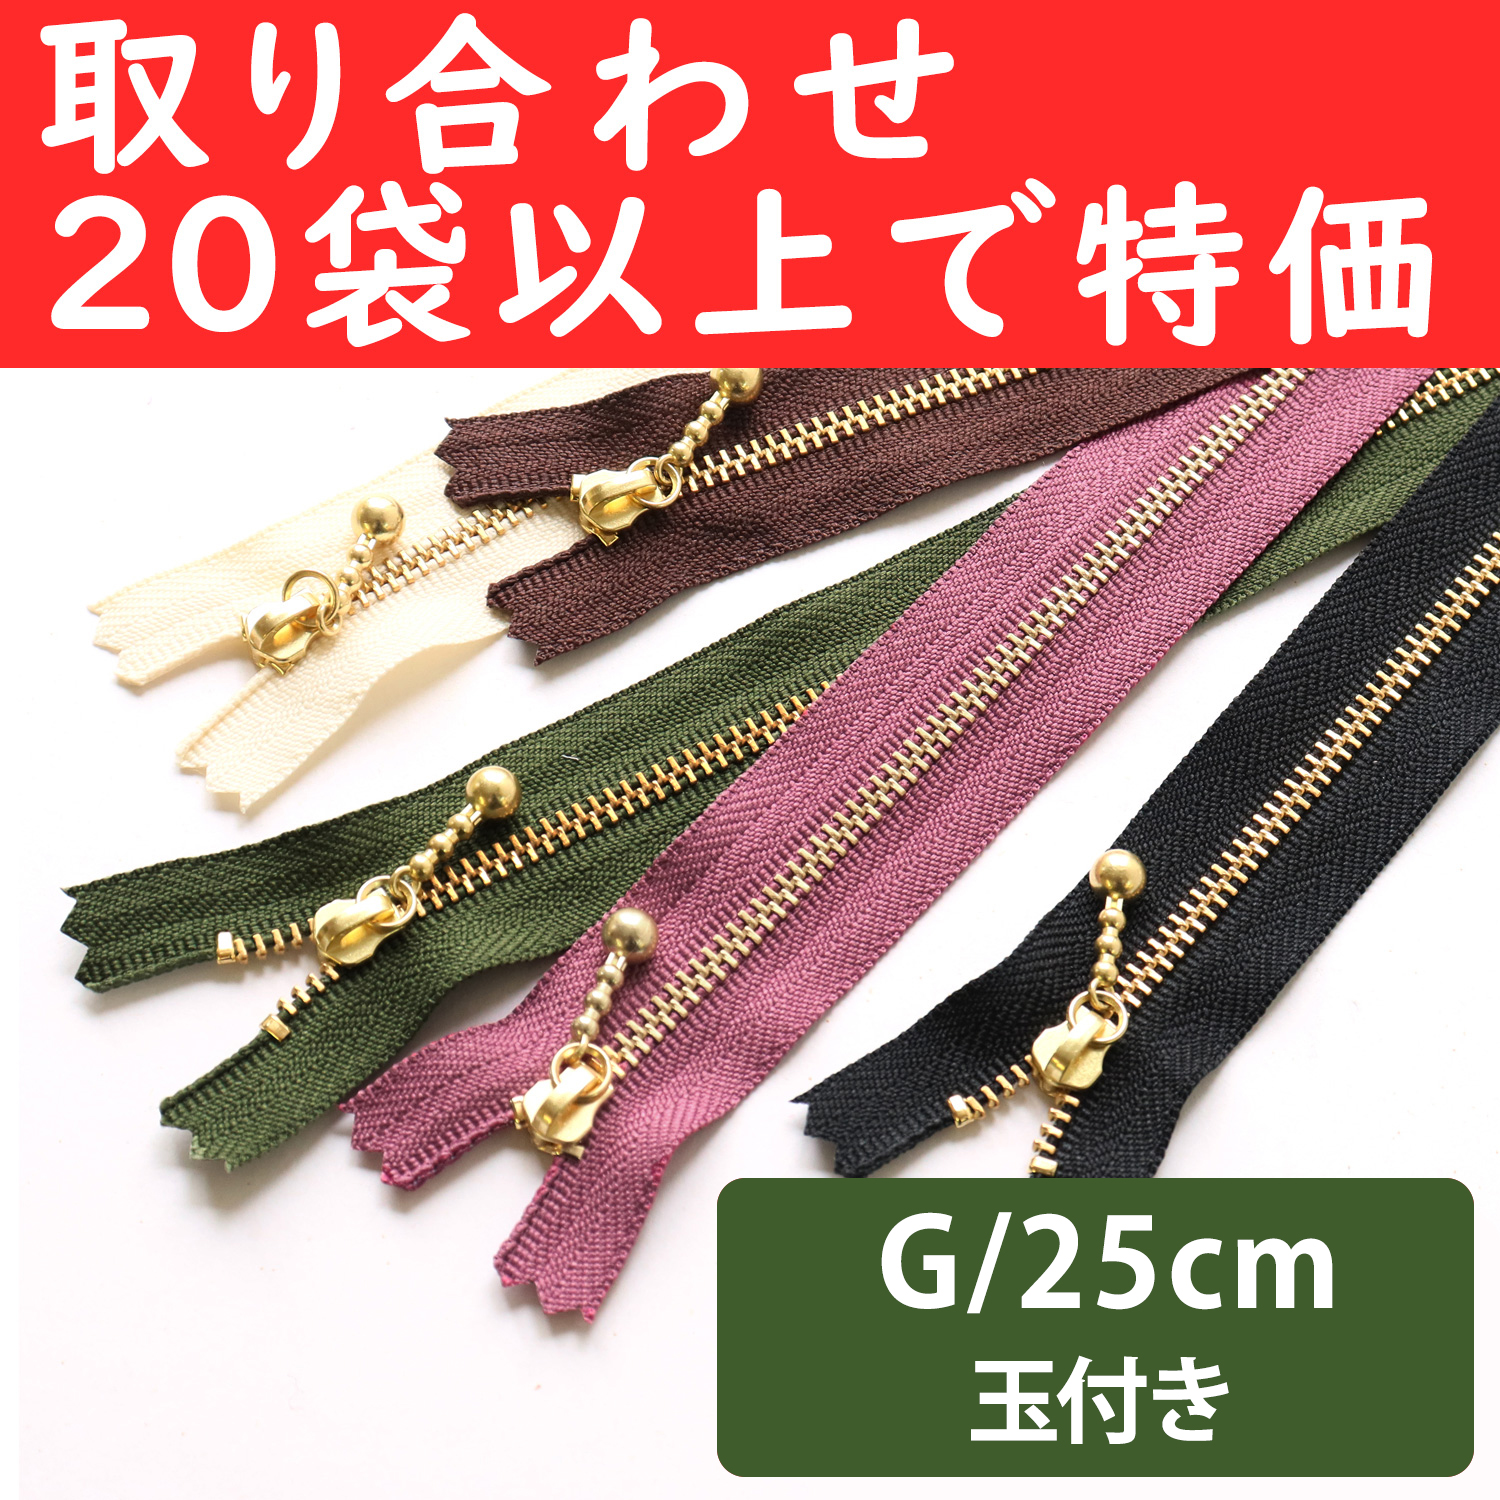 3G25-OVER200 Special)Ball Pull Zippers  G 25cm ", orders with 20 bags or more (bag)